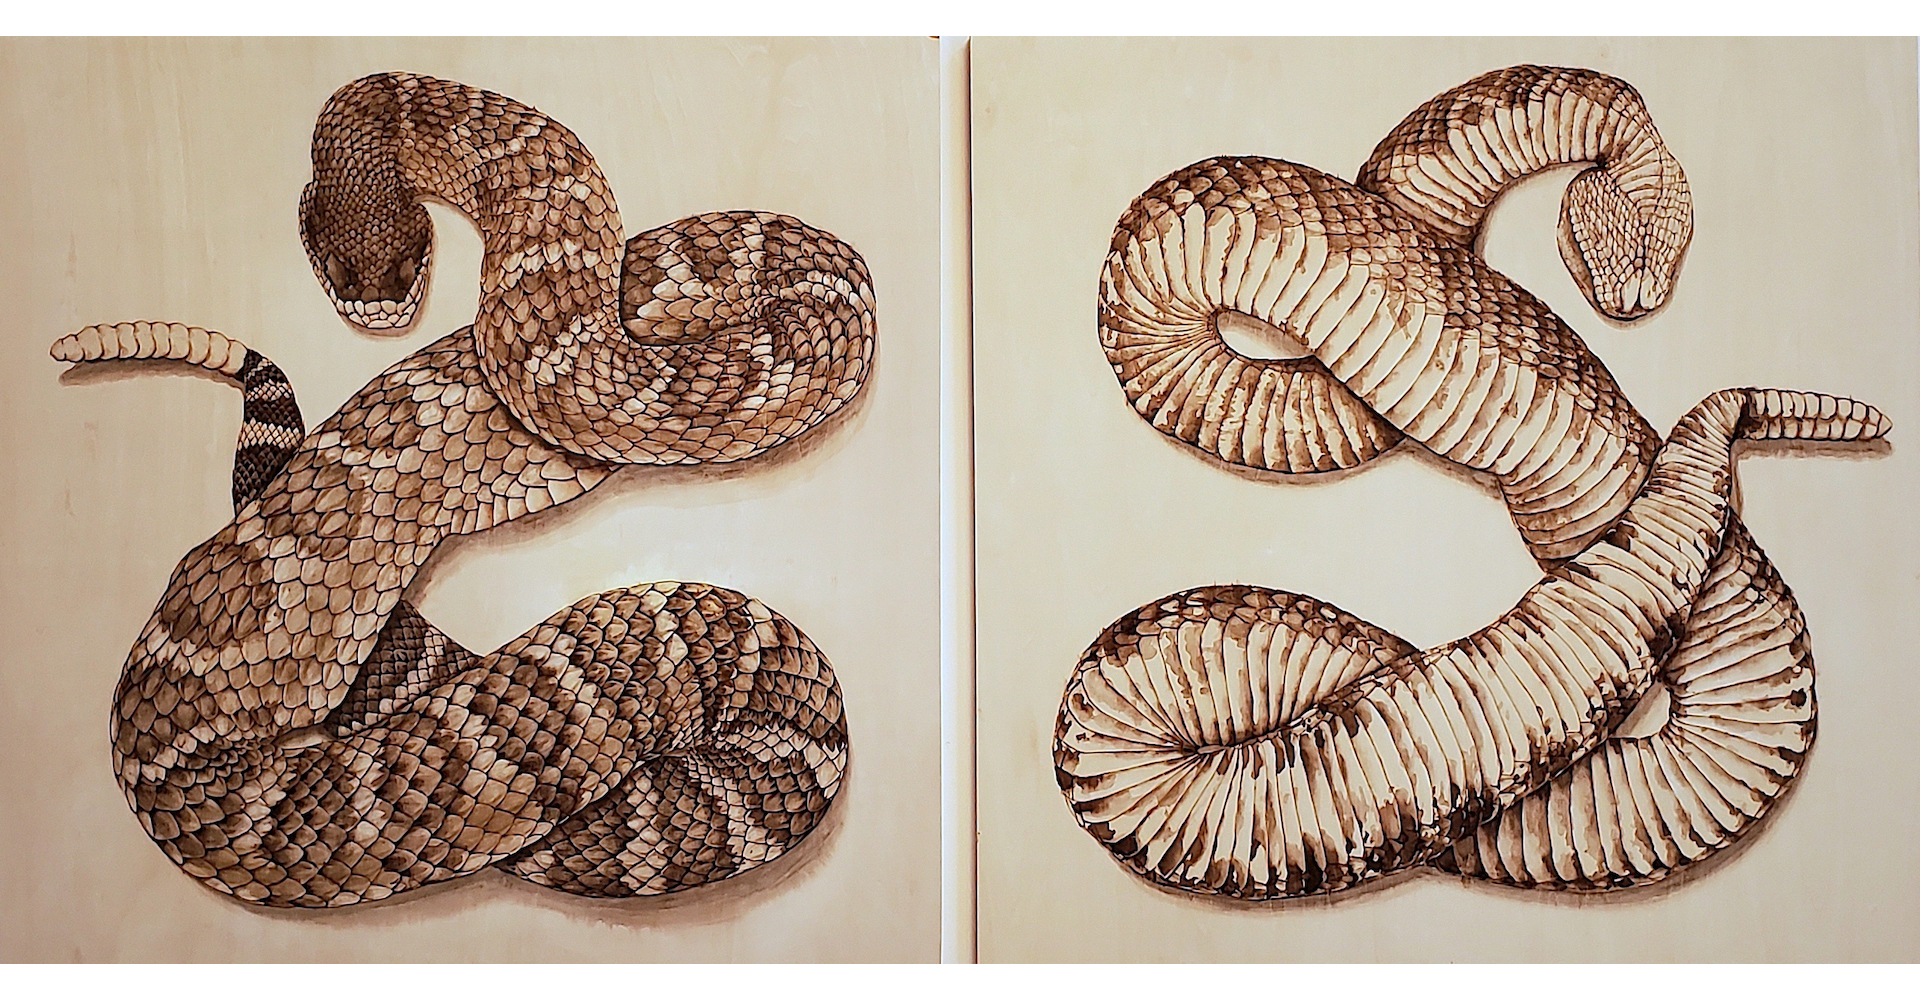 Justin Gibbens, Don’t Tread on They/Them, 2021, watercolor, ink, snake blood on panel, 36 x 73 x 1.5 inches (each panel 36 x 36), $8500